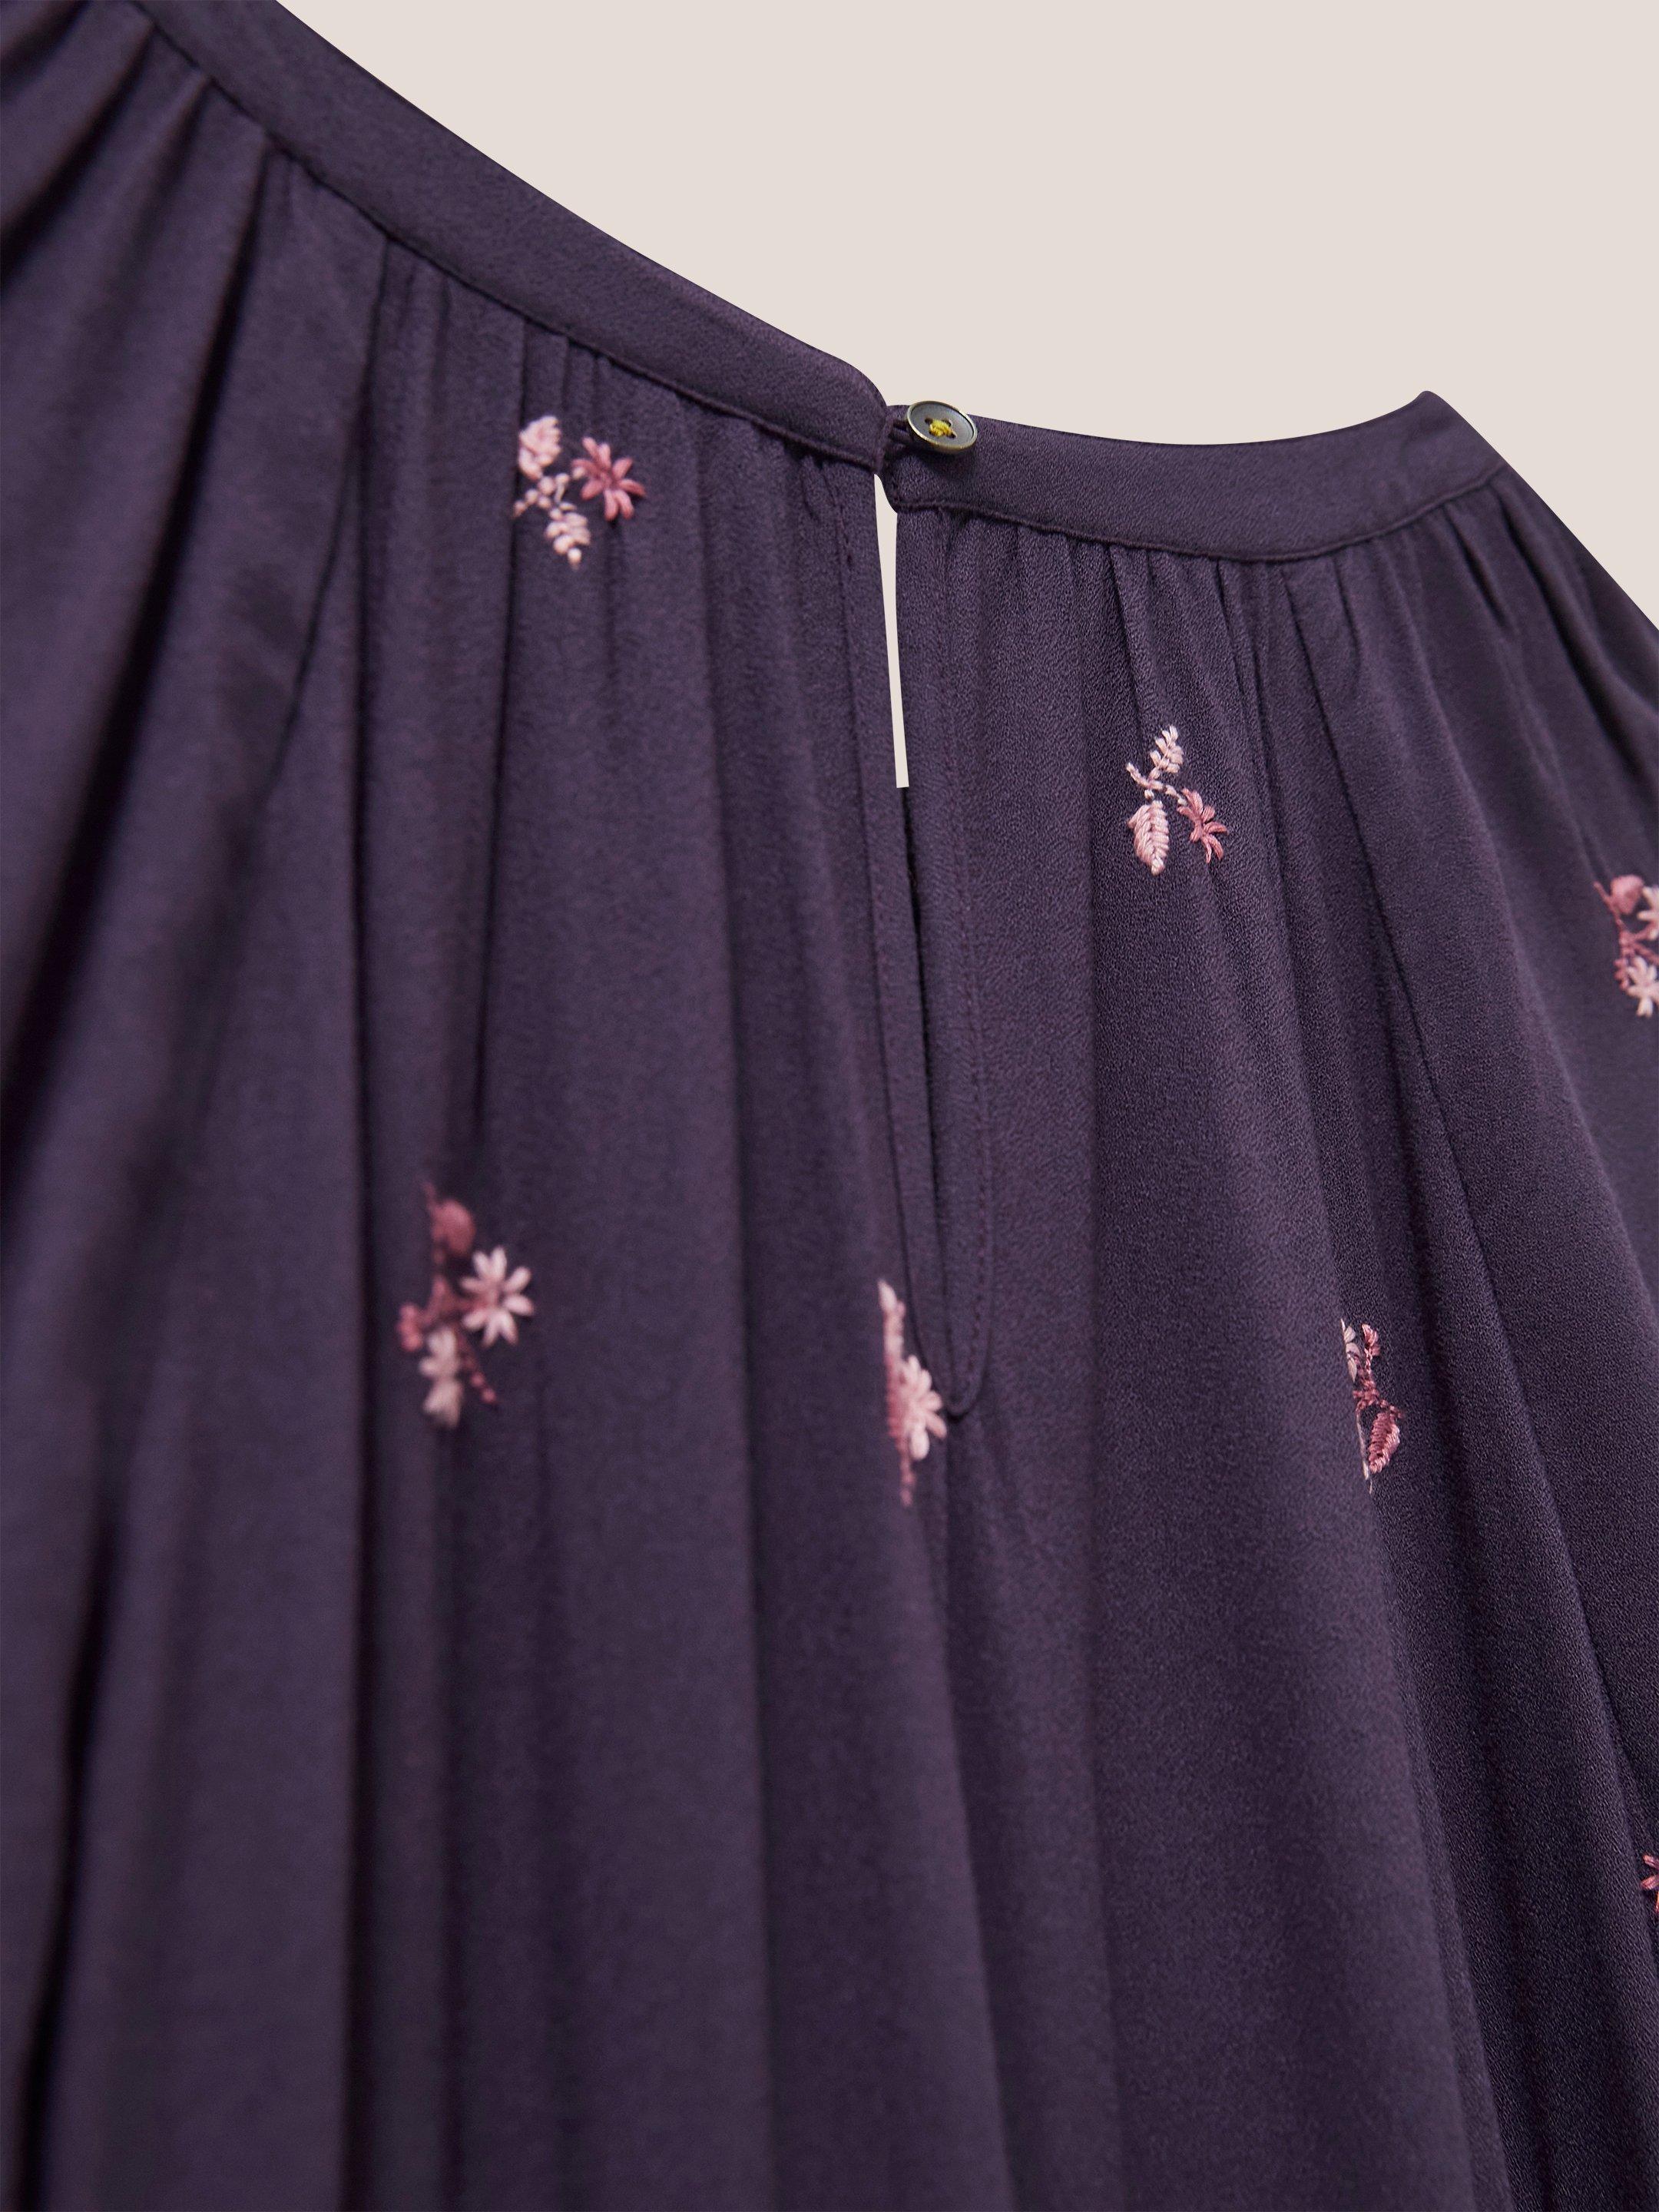 Clara Embroidered Dress in PURPLE MLT - FLAT DETAIL